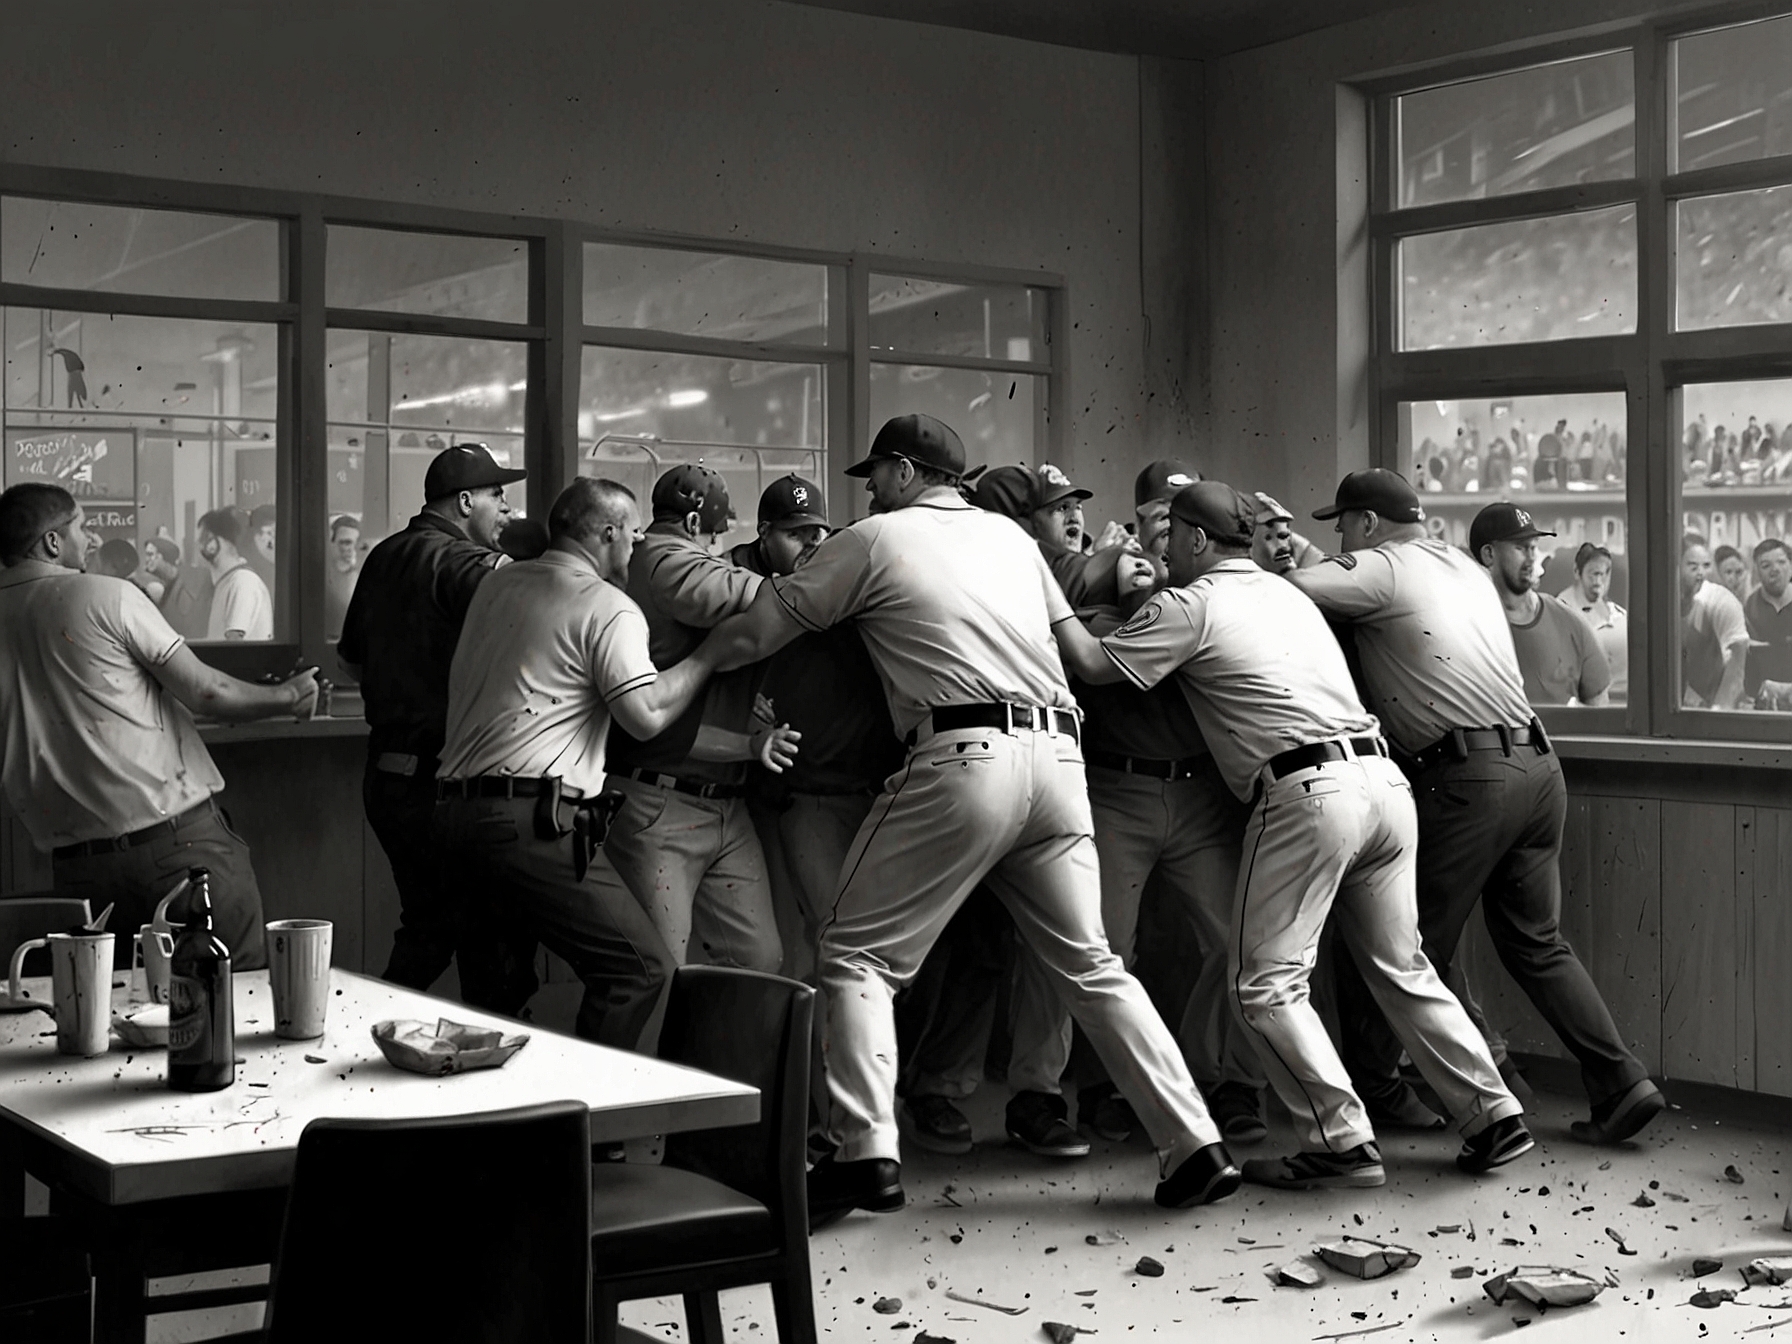 Scene of chaos at an MLB game where fans engaged in a violent brawl after an altercation involving nachos. Security personnel are seen attempting to control the situation.